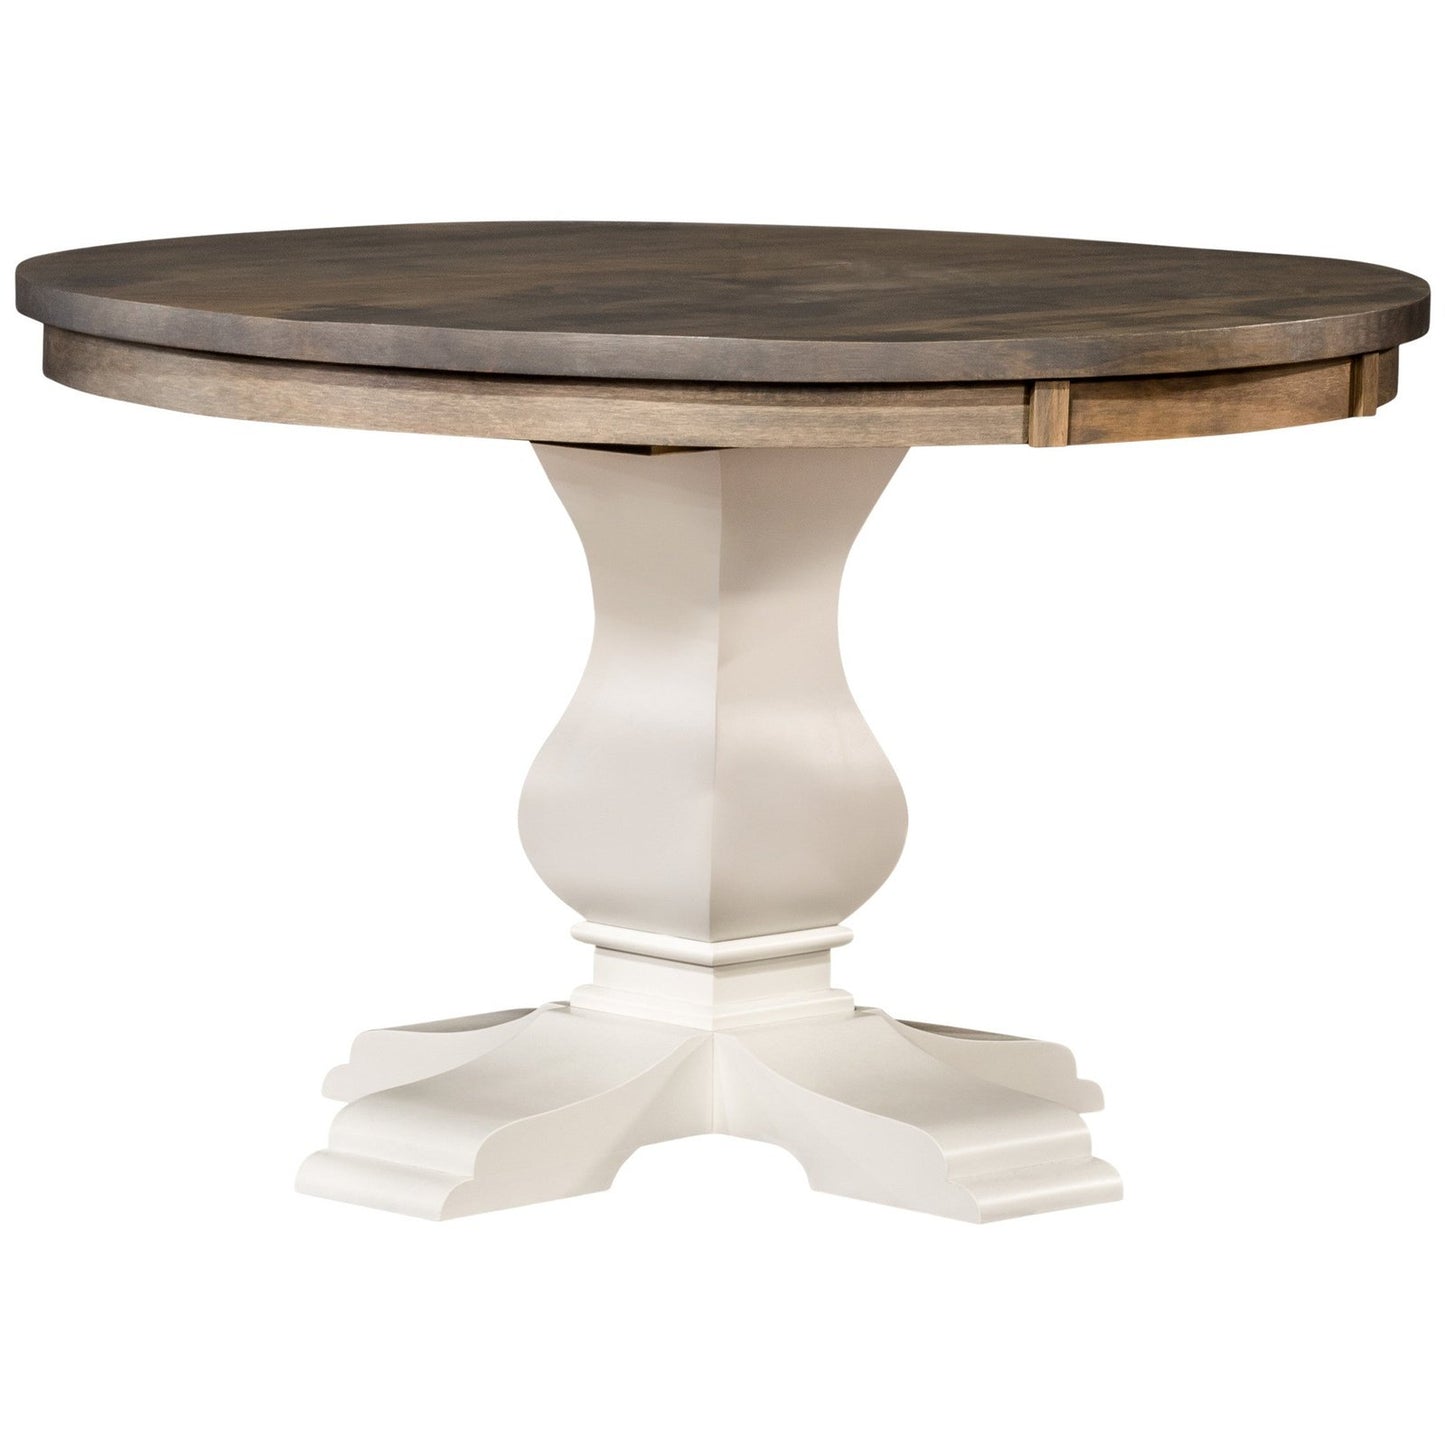 Gallery 42" Round Single Pedestal Dining Table